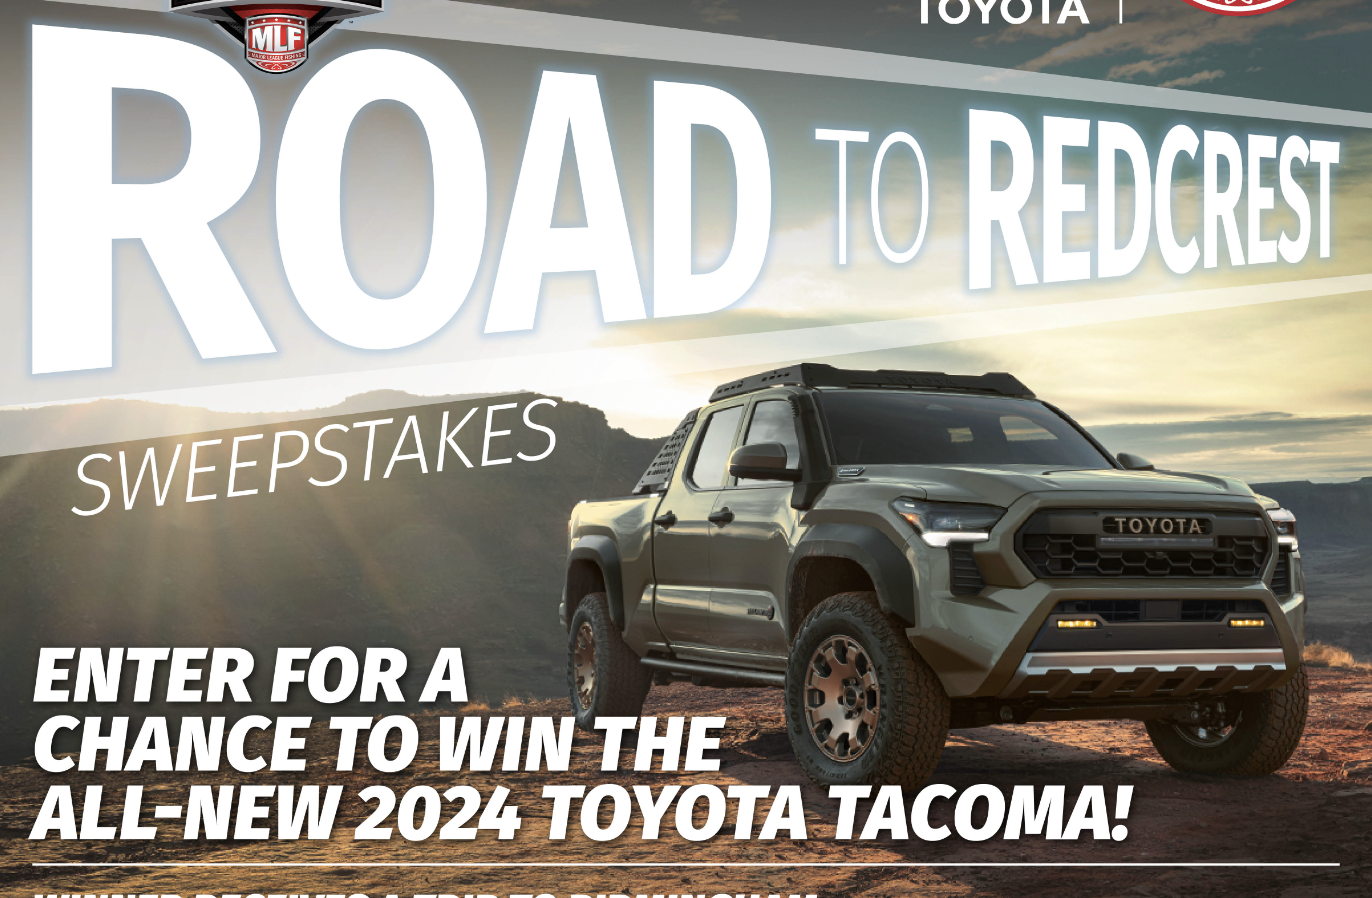 MLF "Toyota Road to REDCREST" Sweepstakes